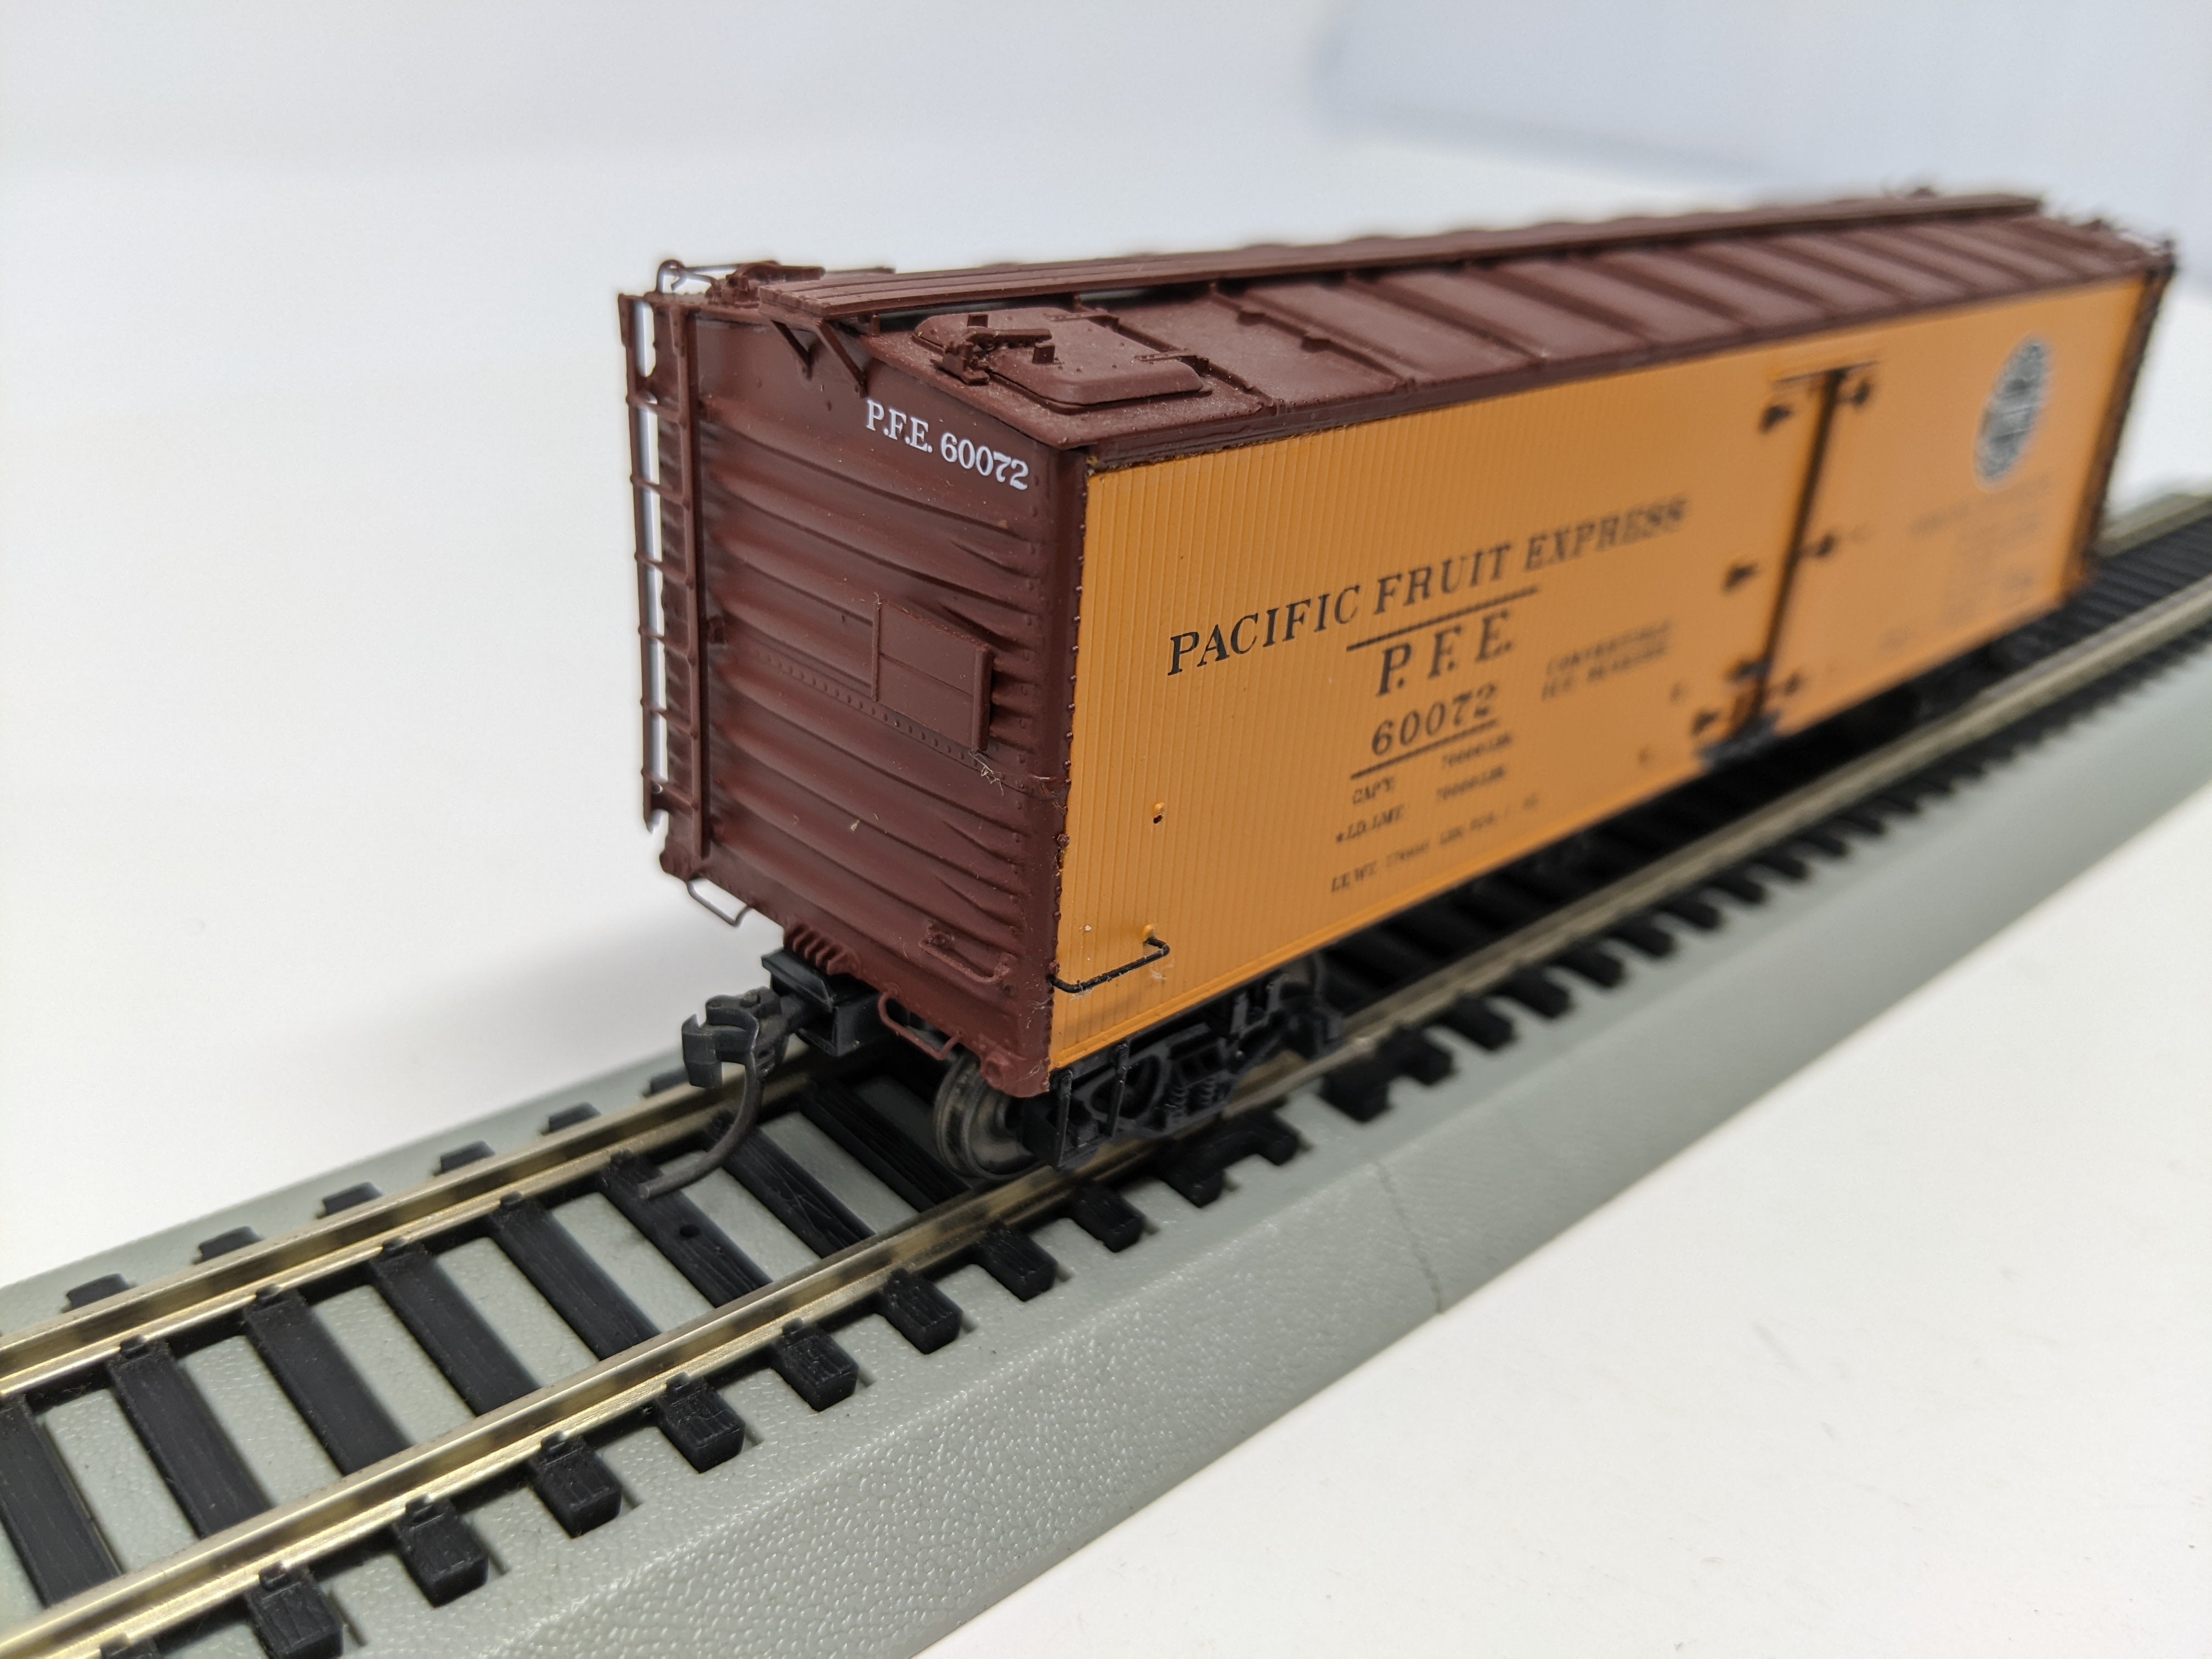 USED HO Scale, 40' Wooden Reefer Box Car, Pacific Fruit Express PFE #60072, Read Description